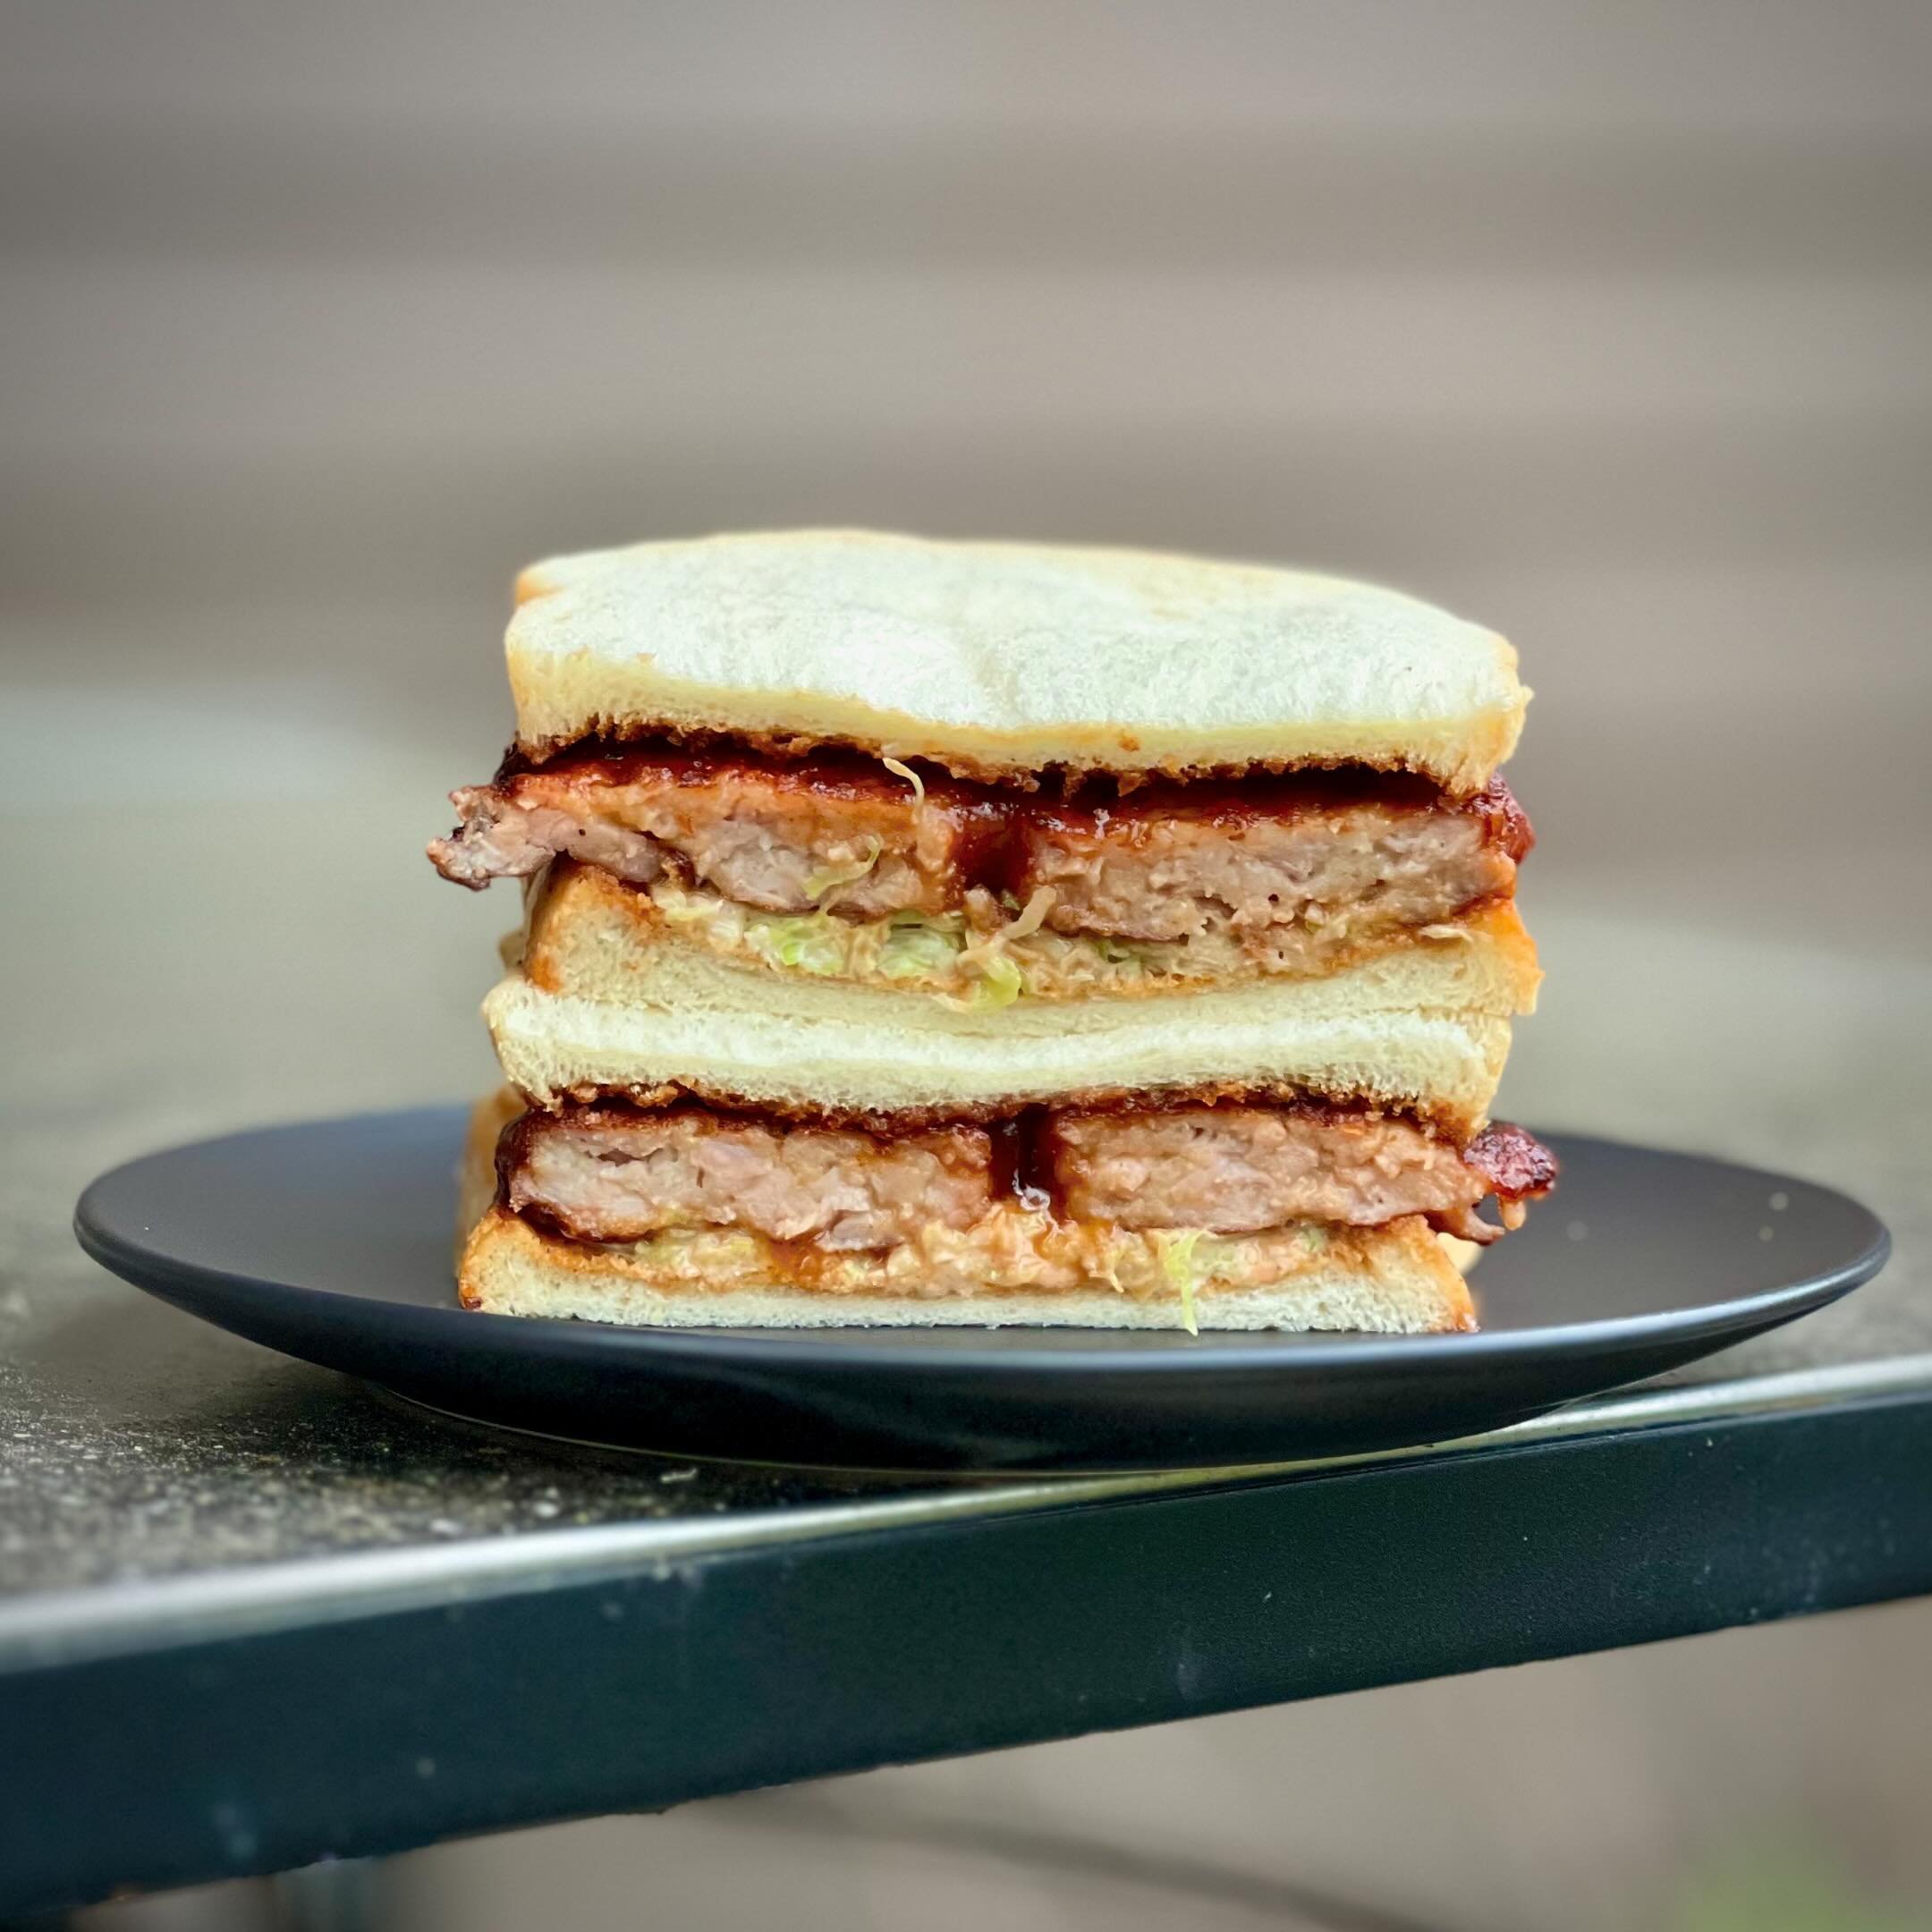 Cooking the books 24/100: Katsu Sando with B&amp;S sauce (Chicken and Charcoal, Matt Abergel @chickenandcharcoal)

This recipe is kinda brilliant. Most katsu is made with chicken (or pork) cutlets, but this one uses ground chicken. Which makes sense 